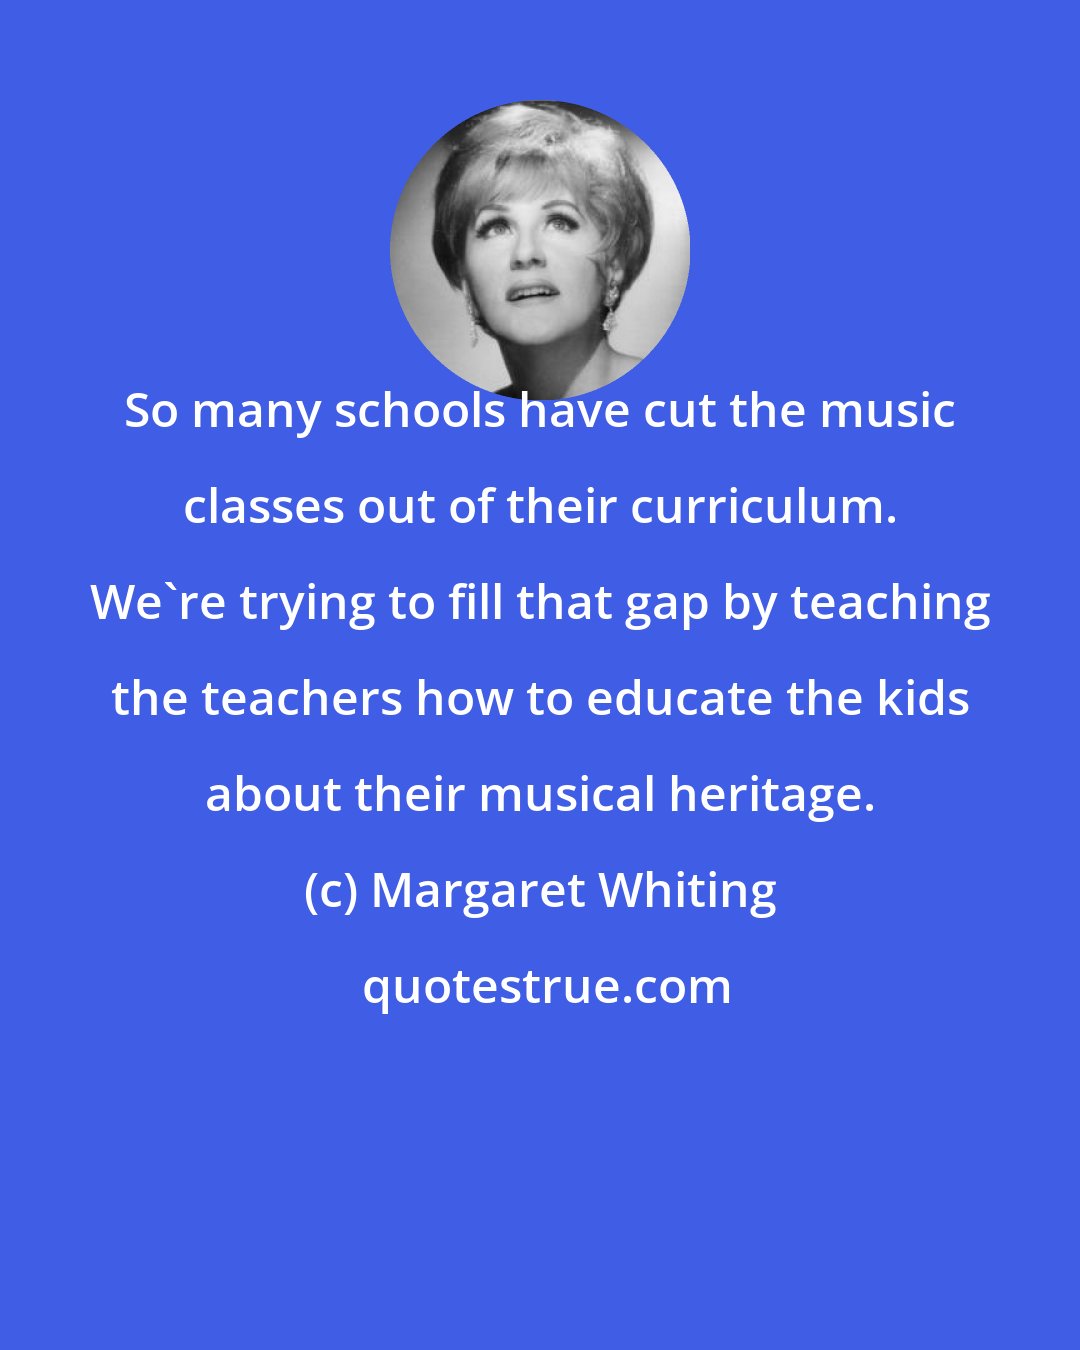 Margaret Whiting: So many schools have cut the music classes out of their curriculum. We're trying to fill that gap by teaching the teachers how to educate the kids about their musical heritage.